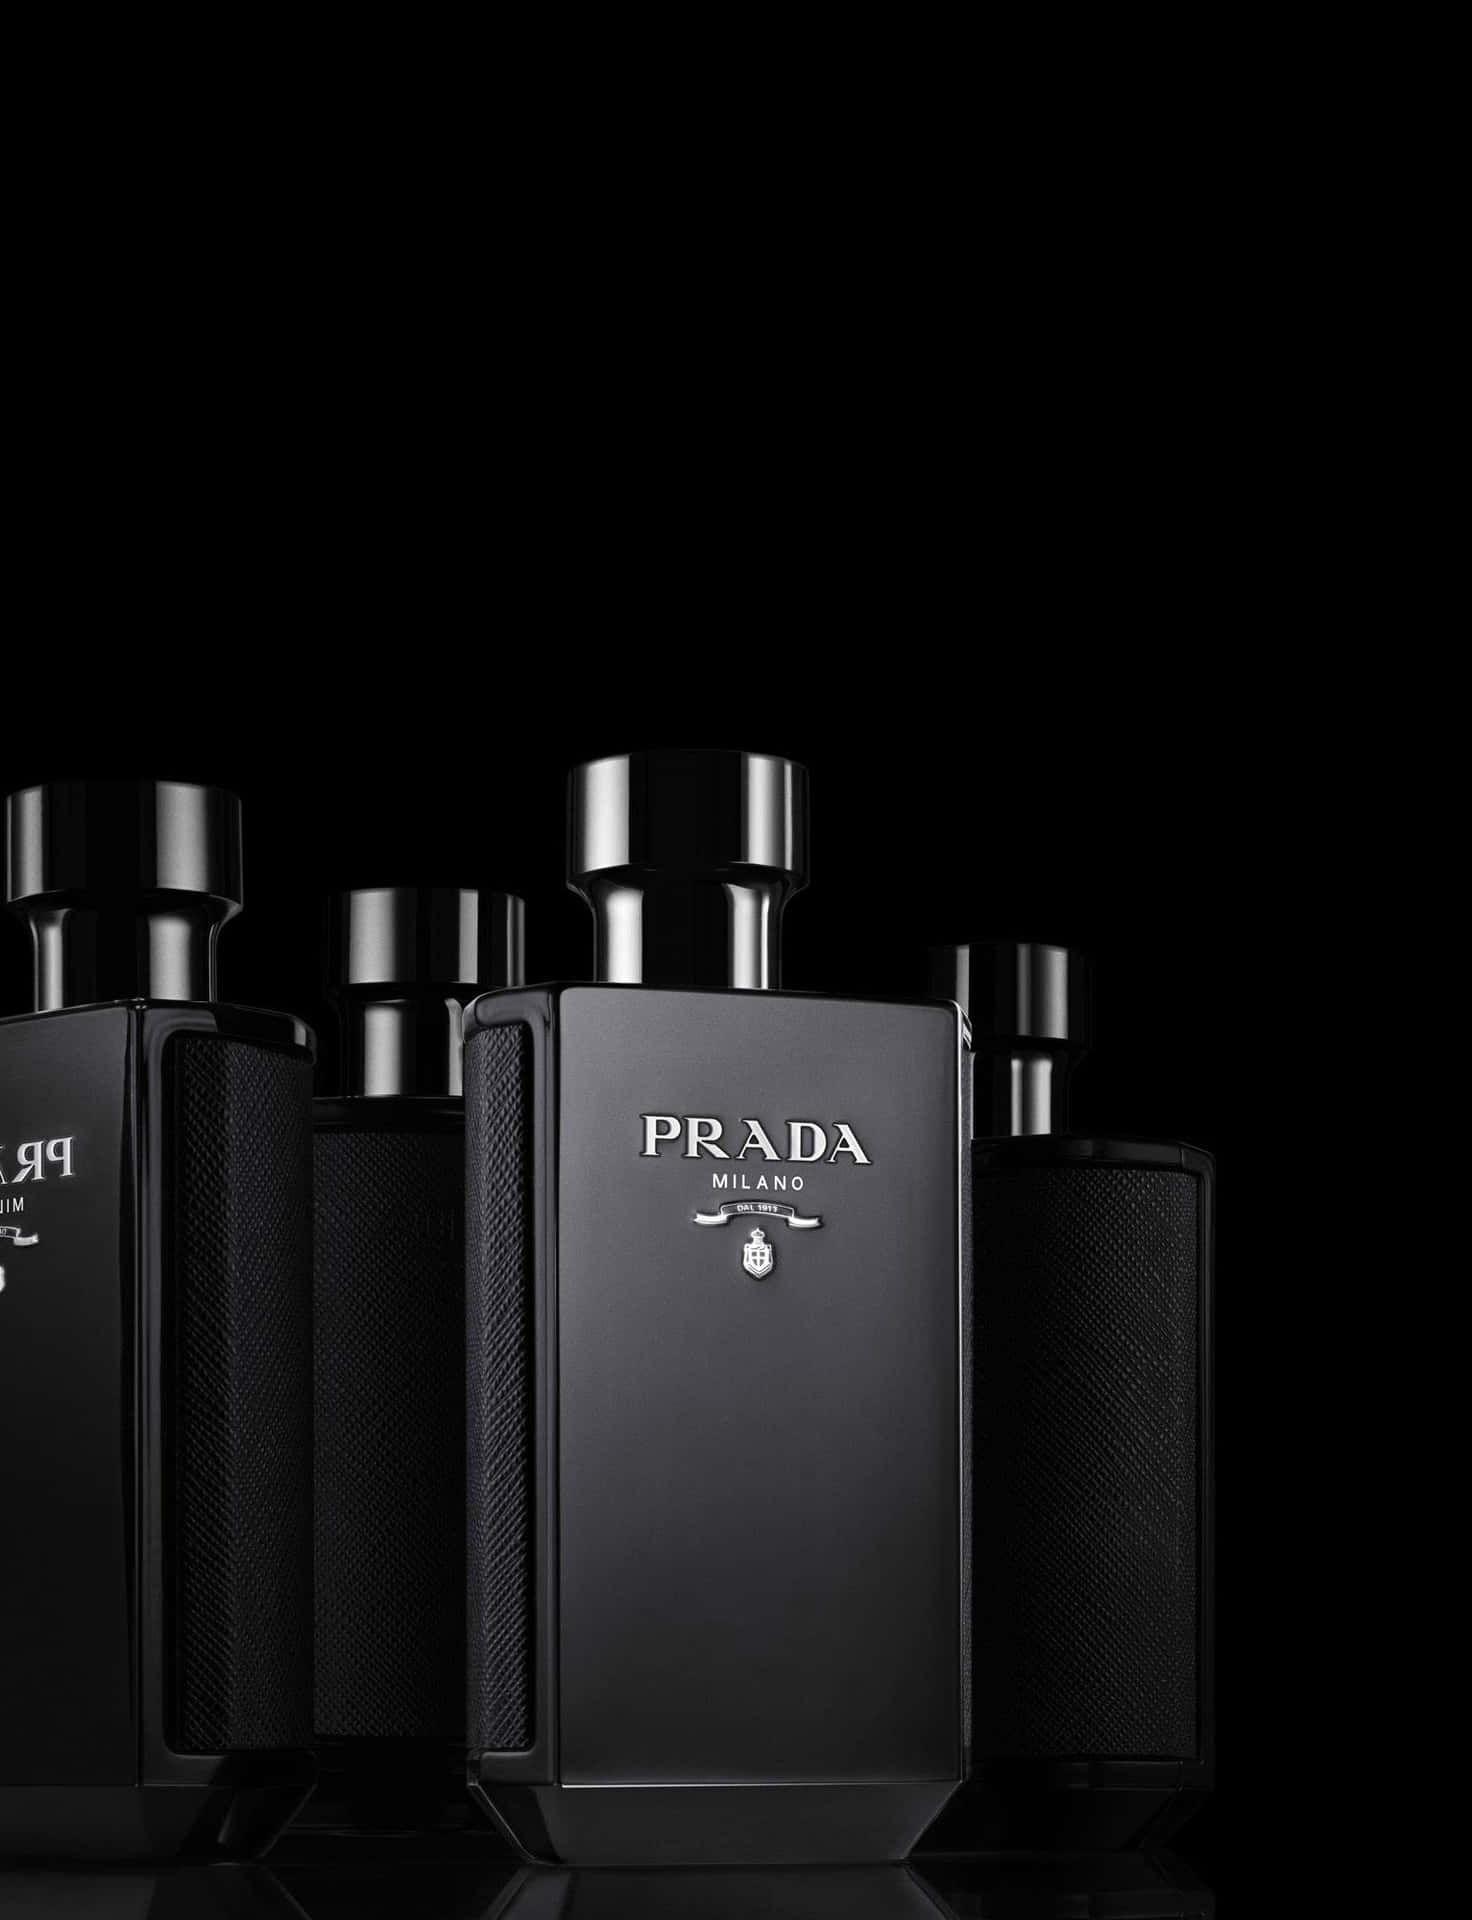 Sophisticated and modern fashion from Prada